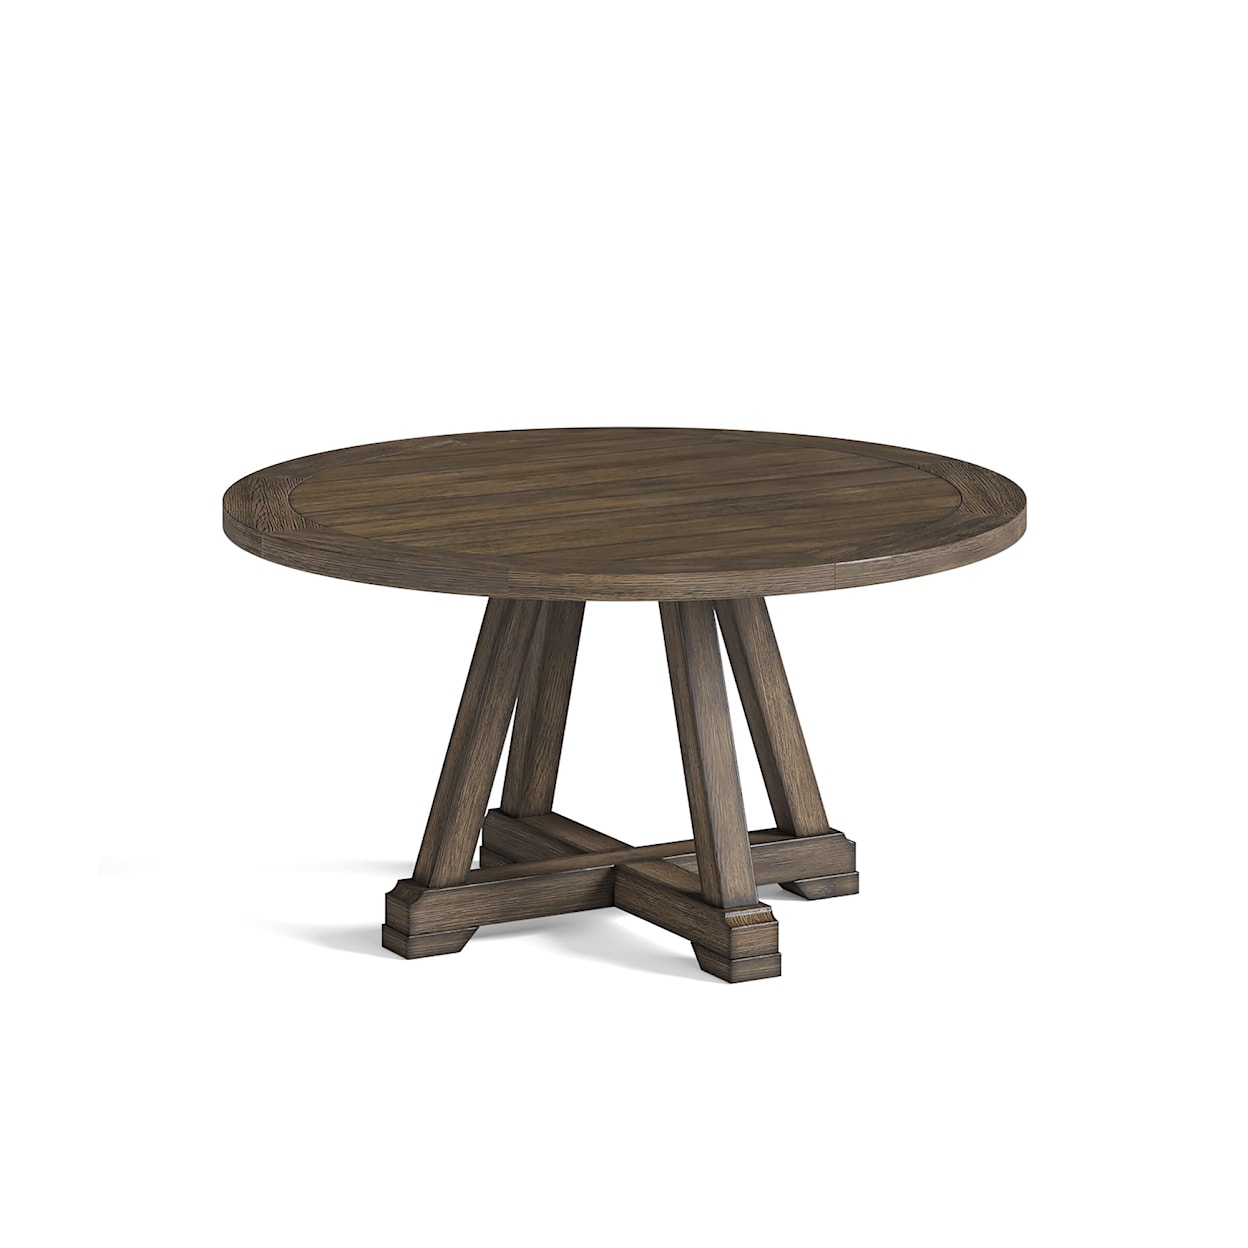 Global Home Stone Creek Stone Creek Round Dining Table